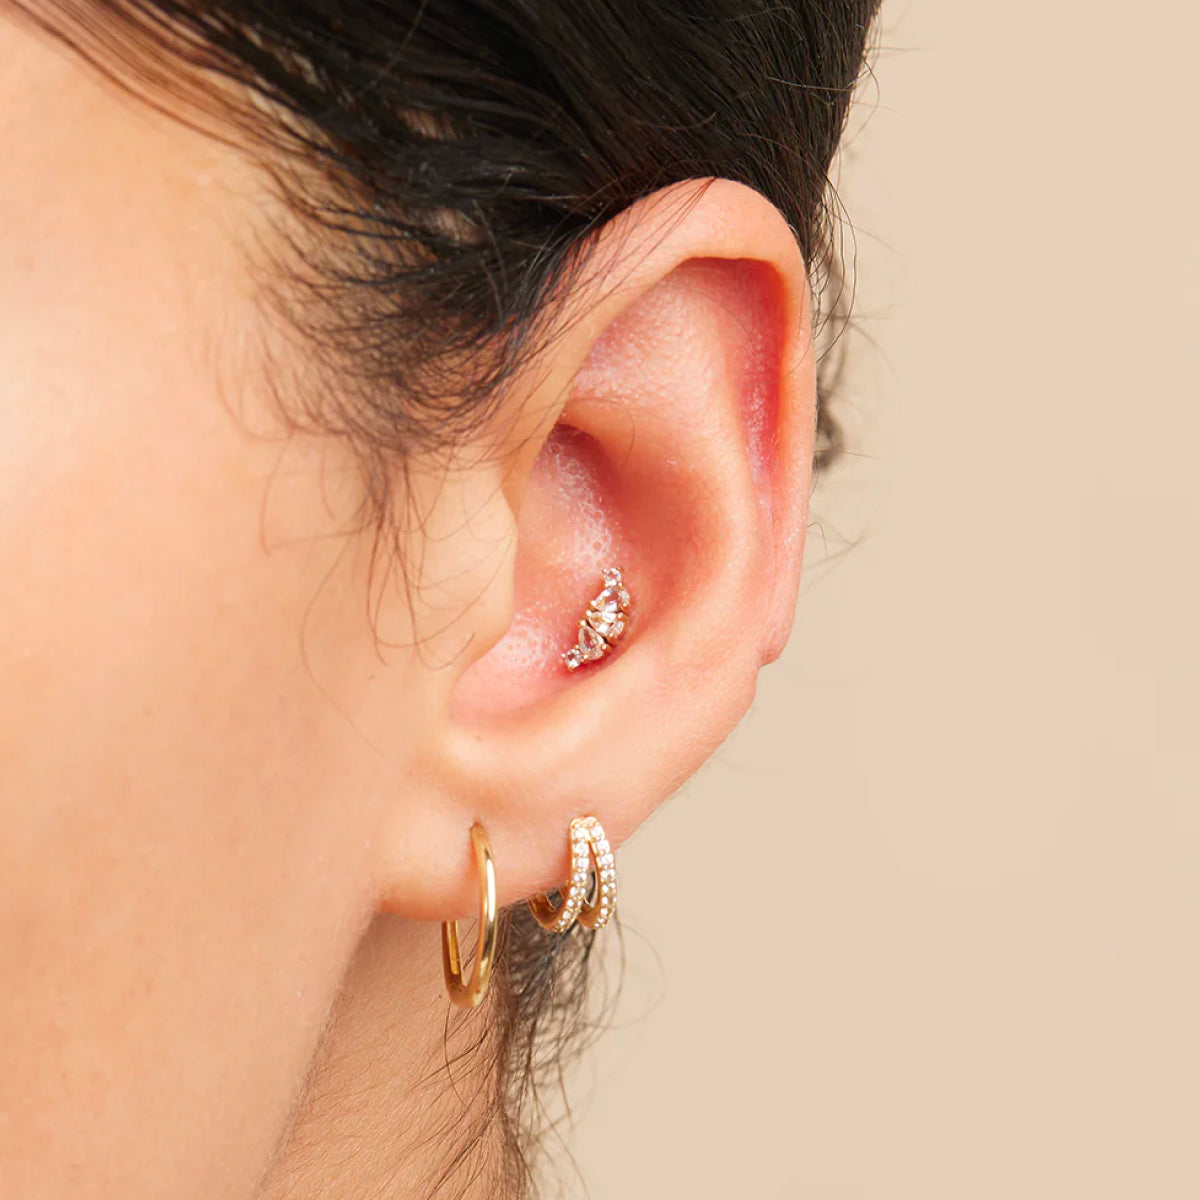 I've had my conch pierced for close to 14 years but whenever I put a hoop  in it gets sore after sleeping. This is the aesthetic I want. Does this  happen to